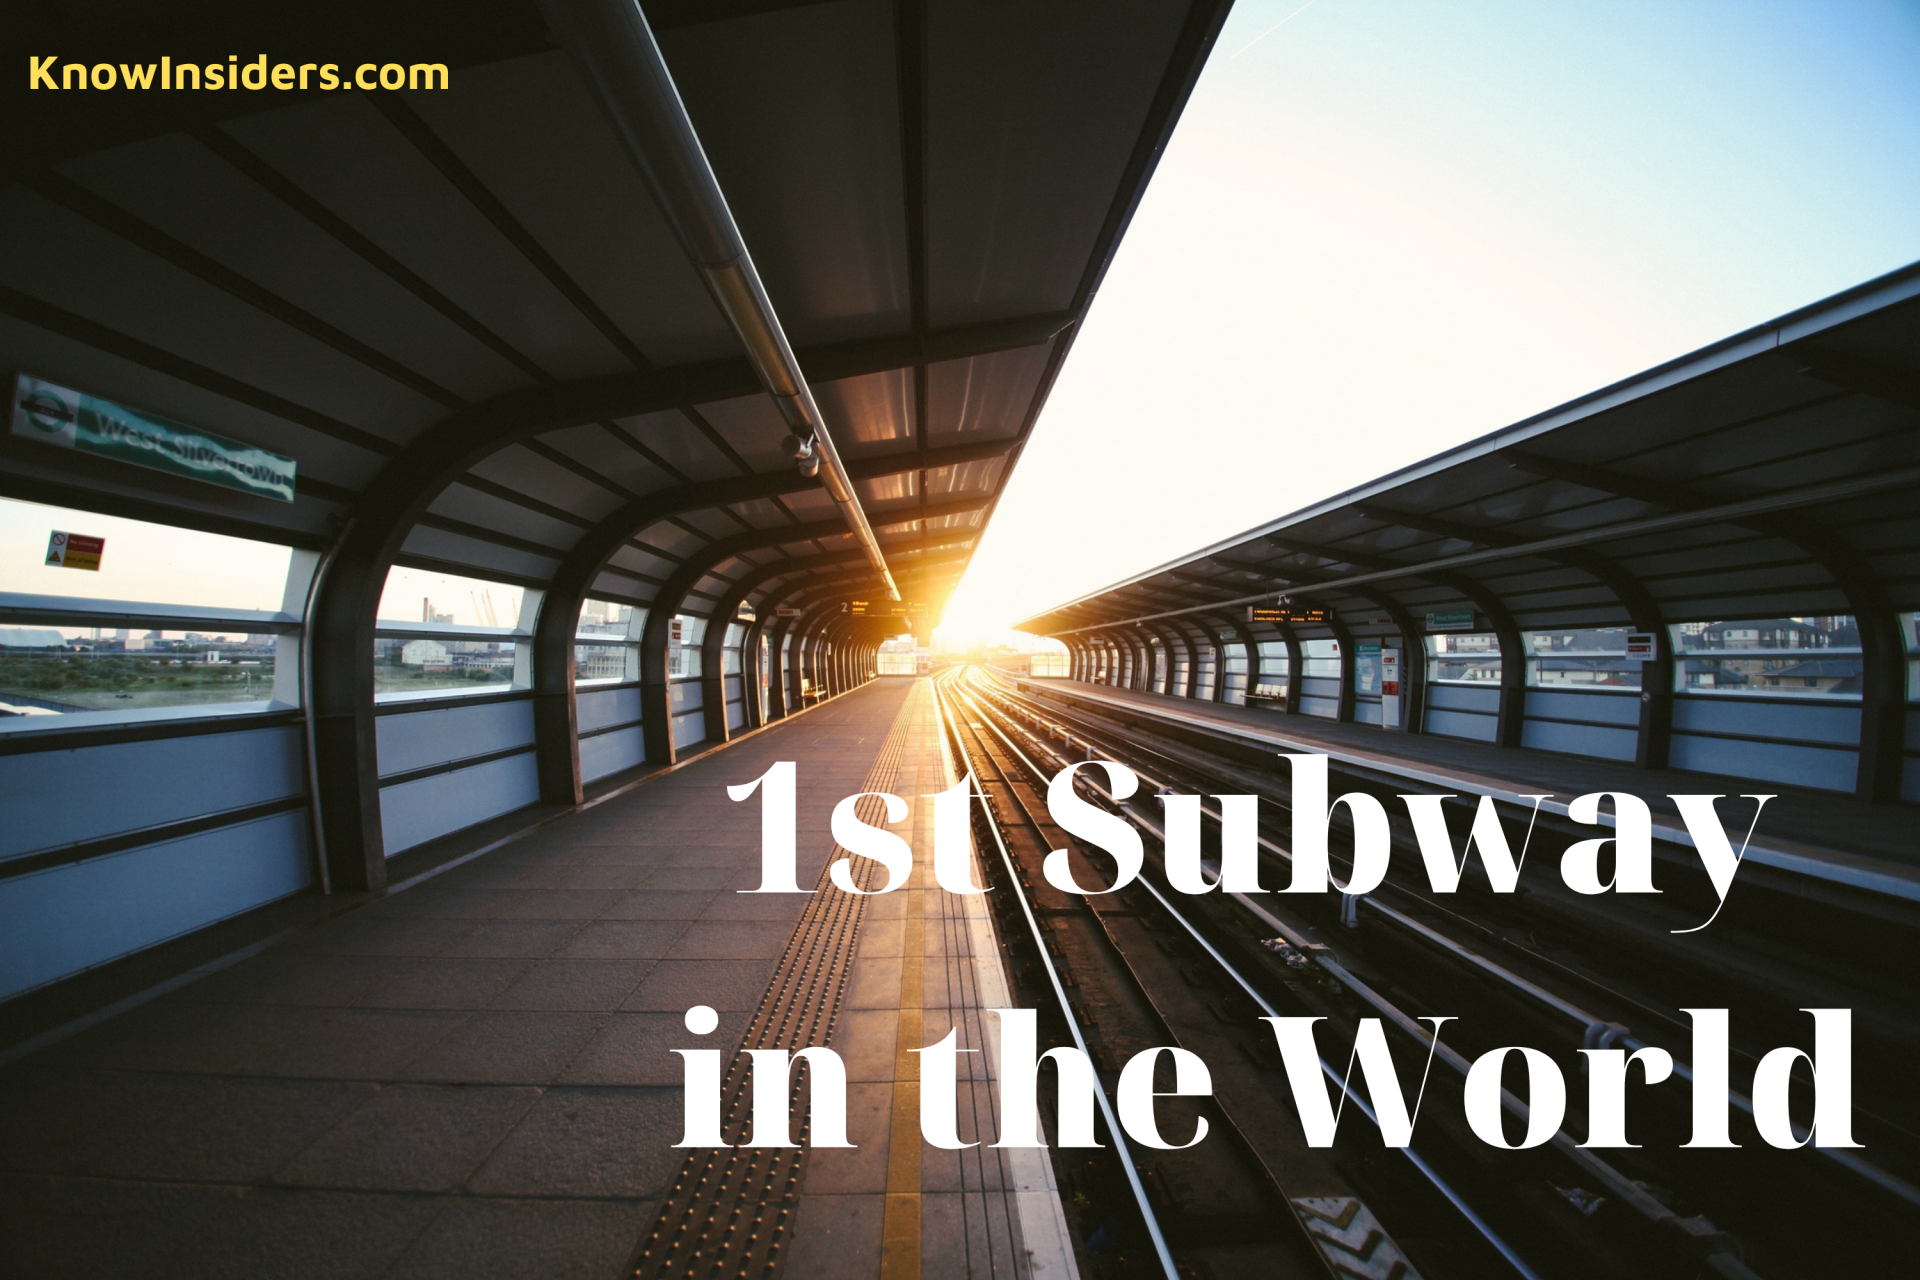 What Was The First Subway in the World?